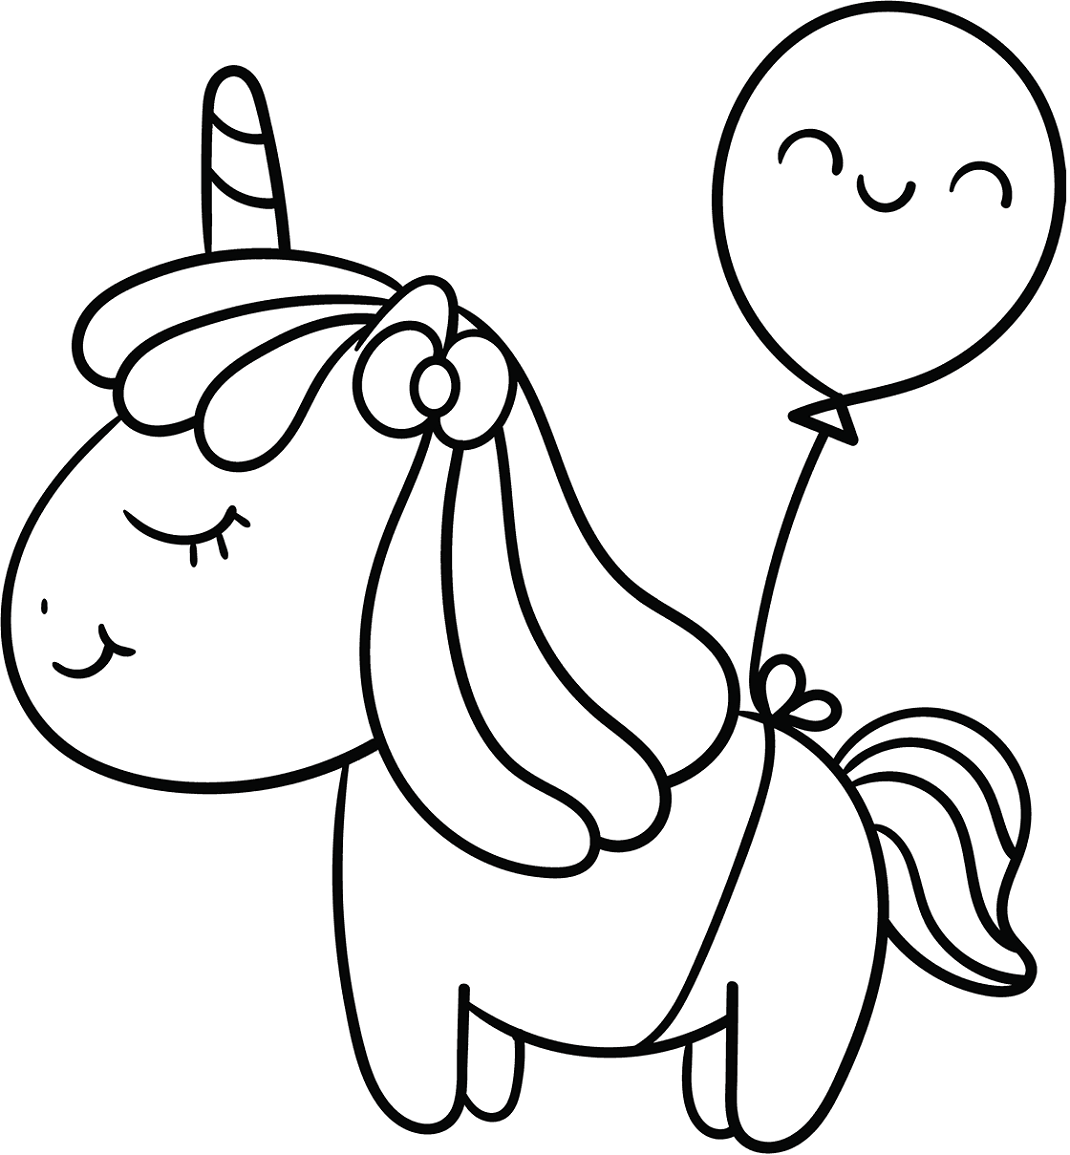 Baby Unicorn With A Balloon Coloring Page - Free Printable ...